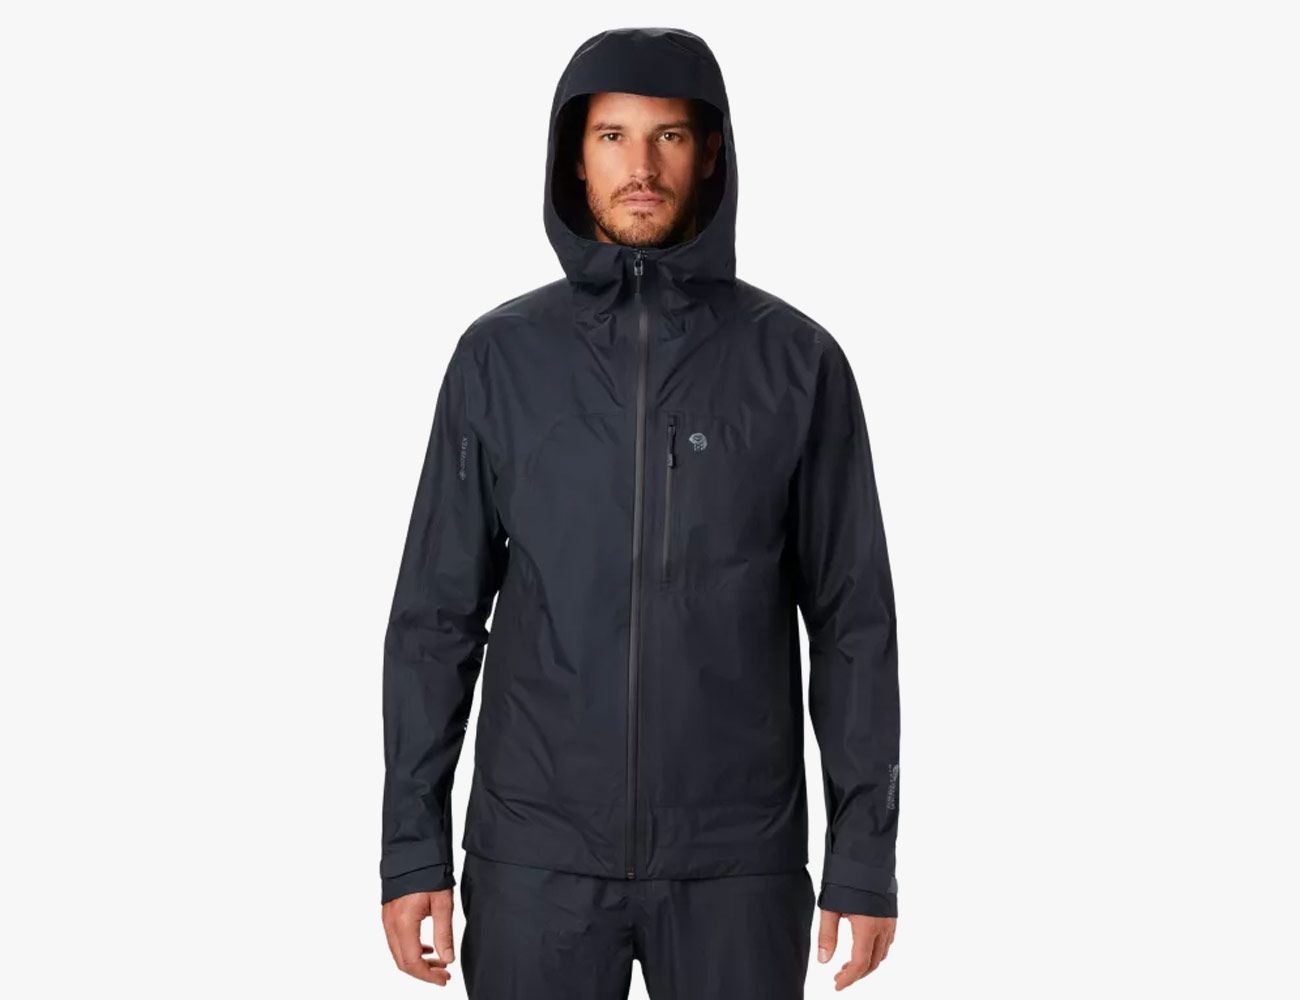 The 15 Best Rain Jackets To Keep You Dry | lupon.gov.ph